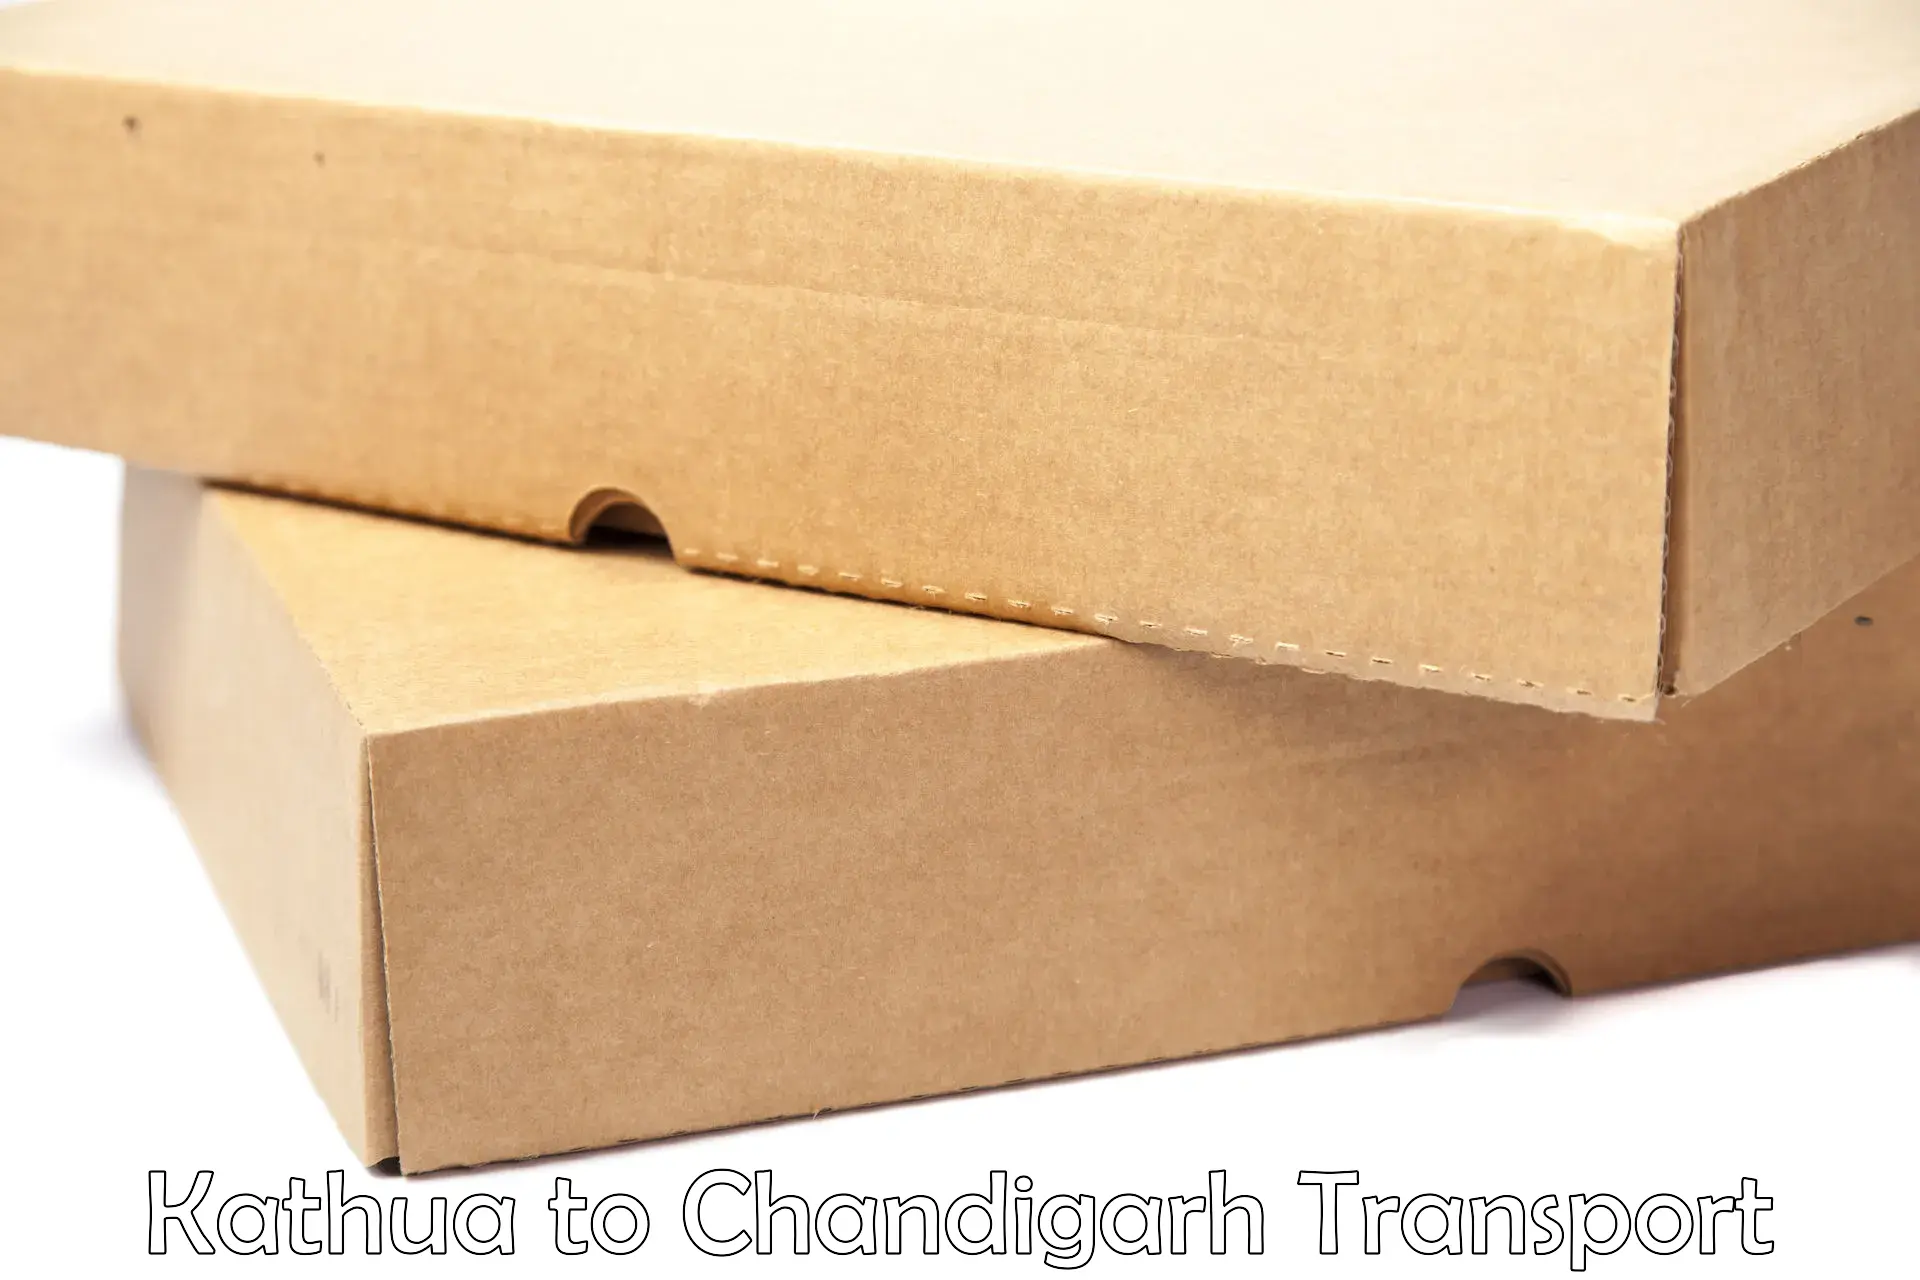 Truck transport companies in India Kathua to Chandigarh